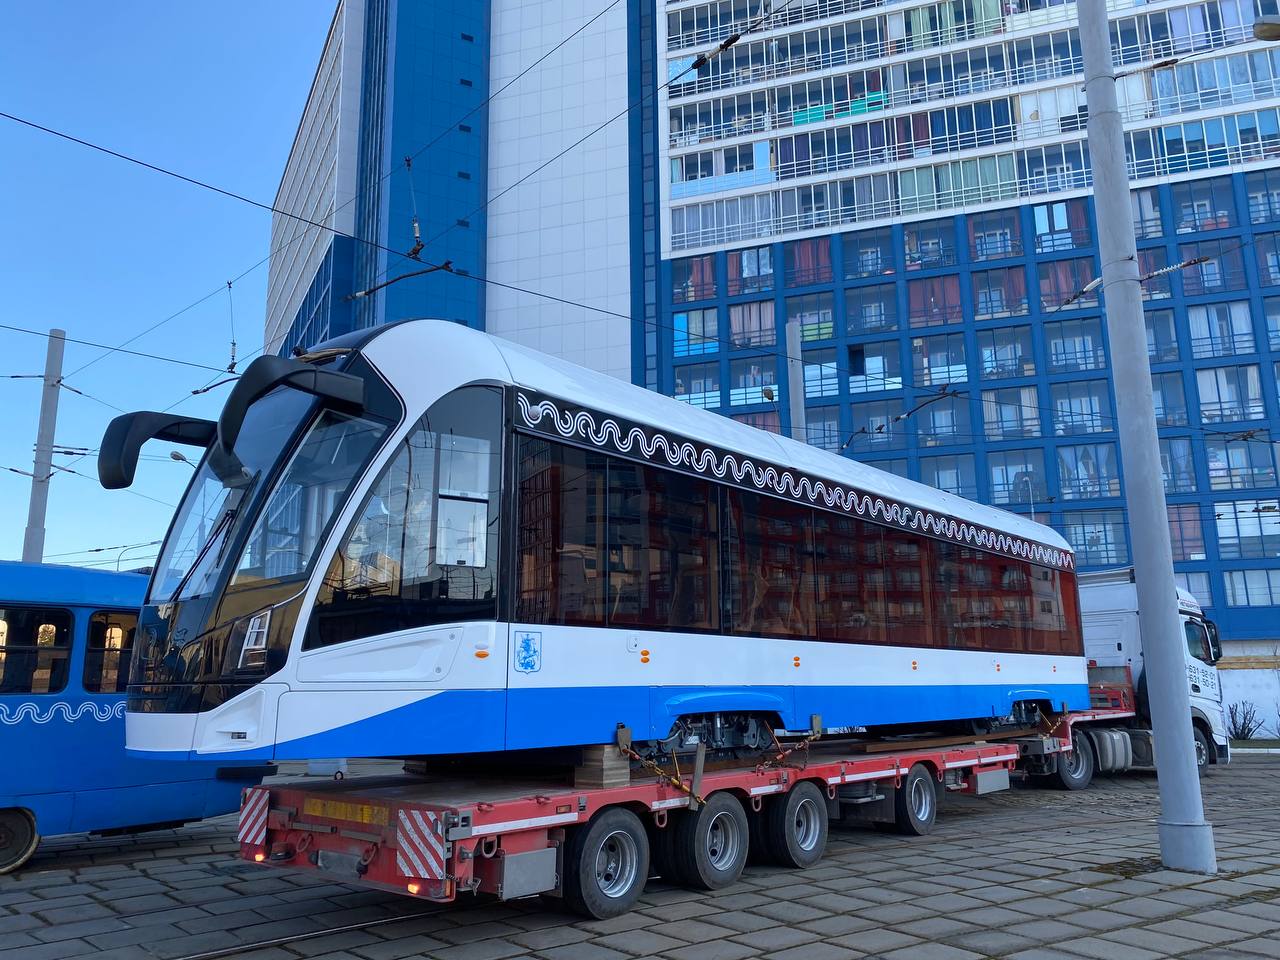 Moskau — Trams without fleet numbers